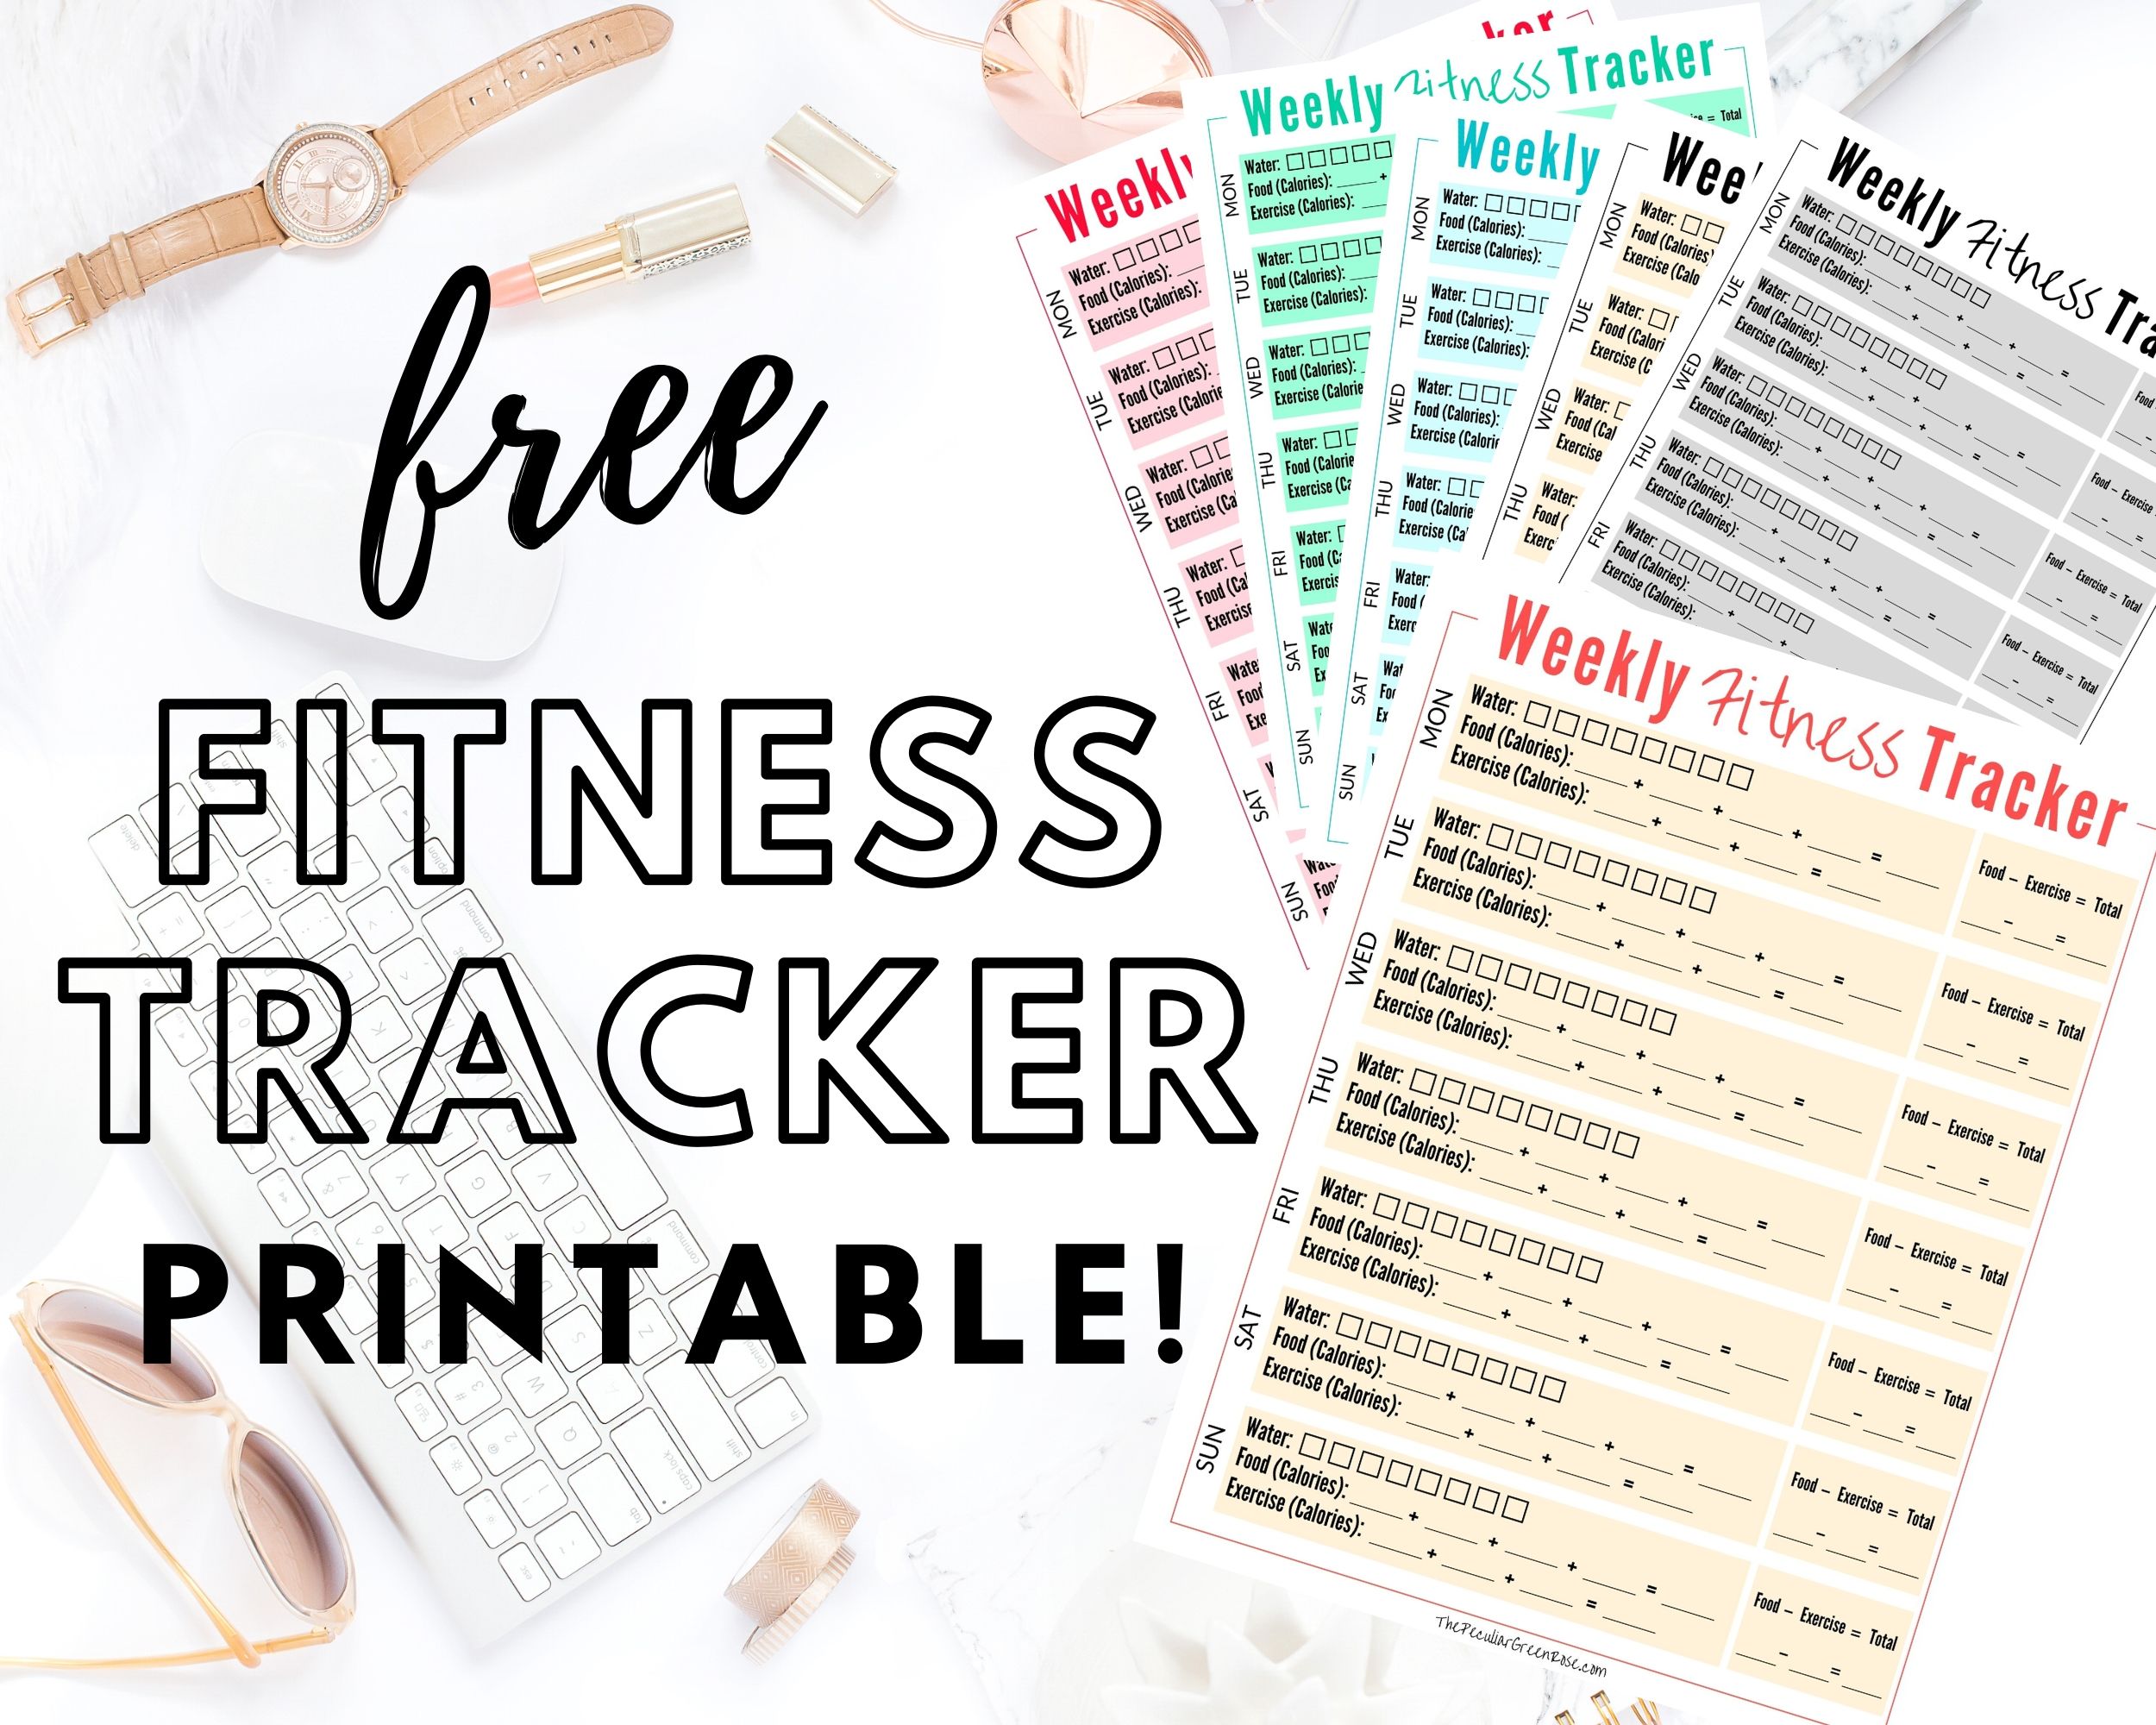 6 Free Weekly Fitness Tracker Printables - The Peculiar Green Rose